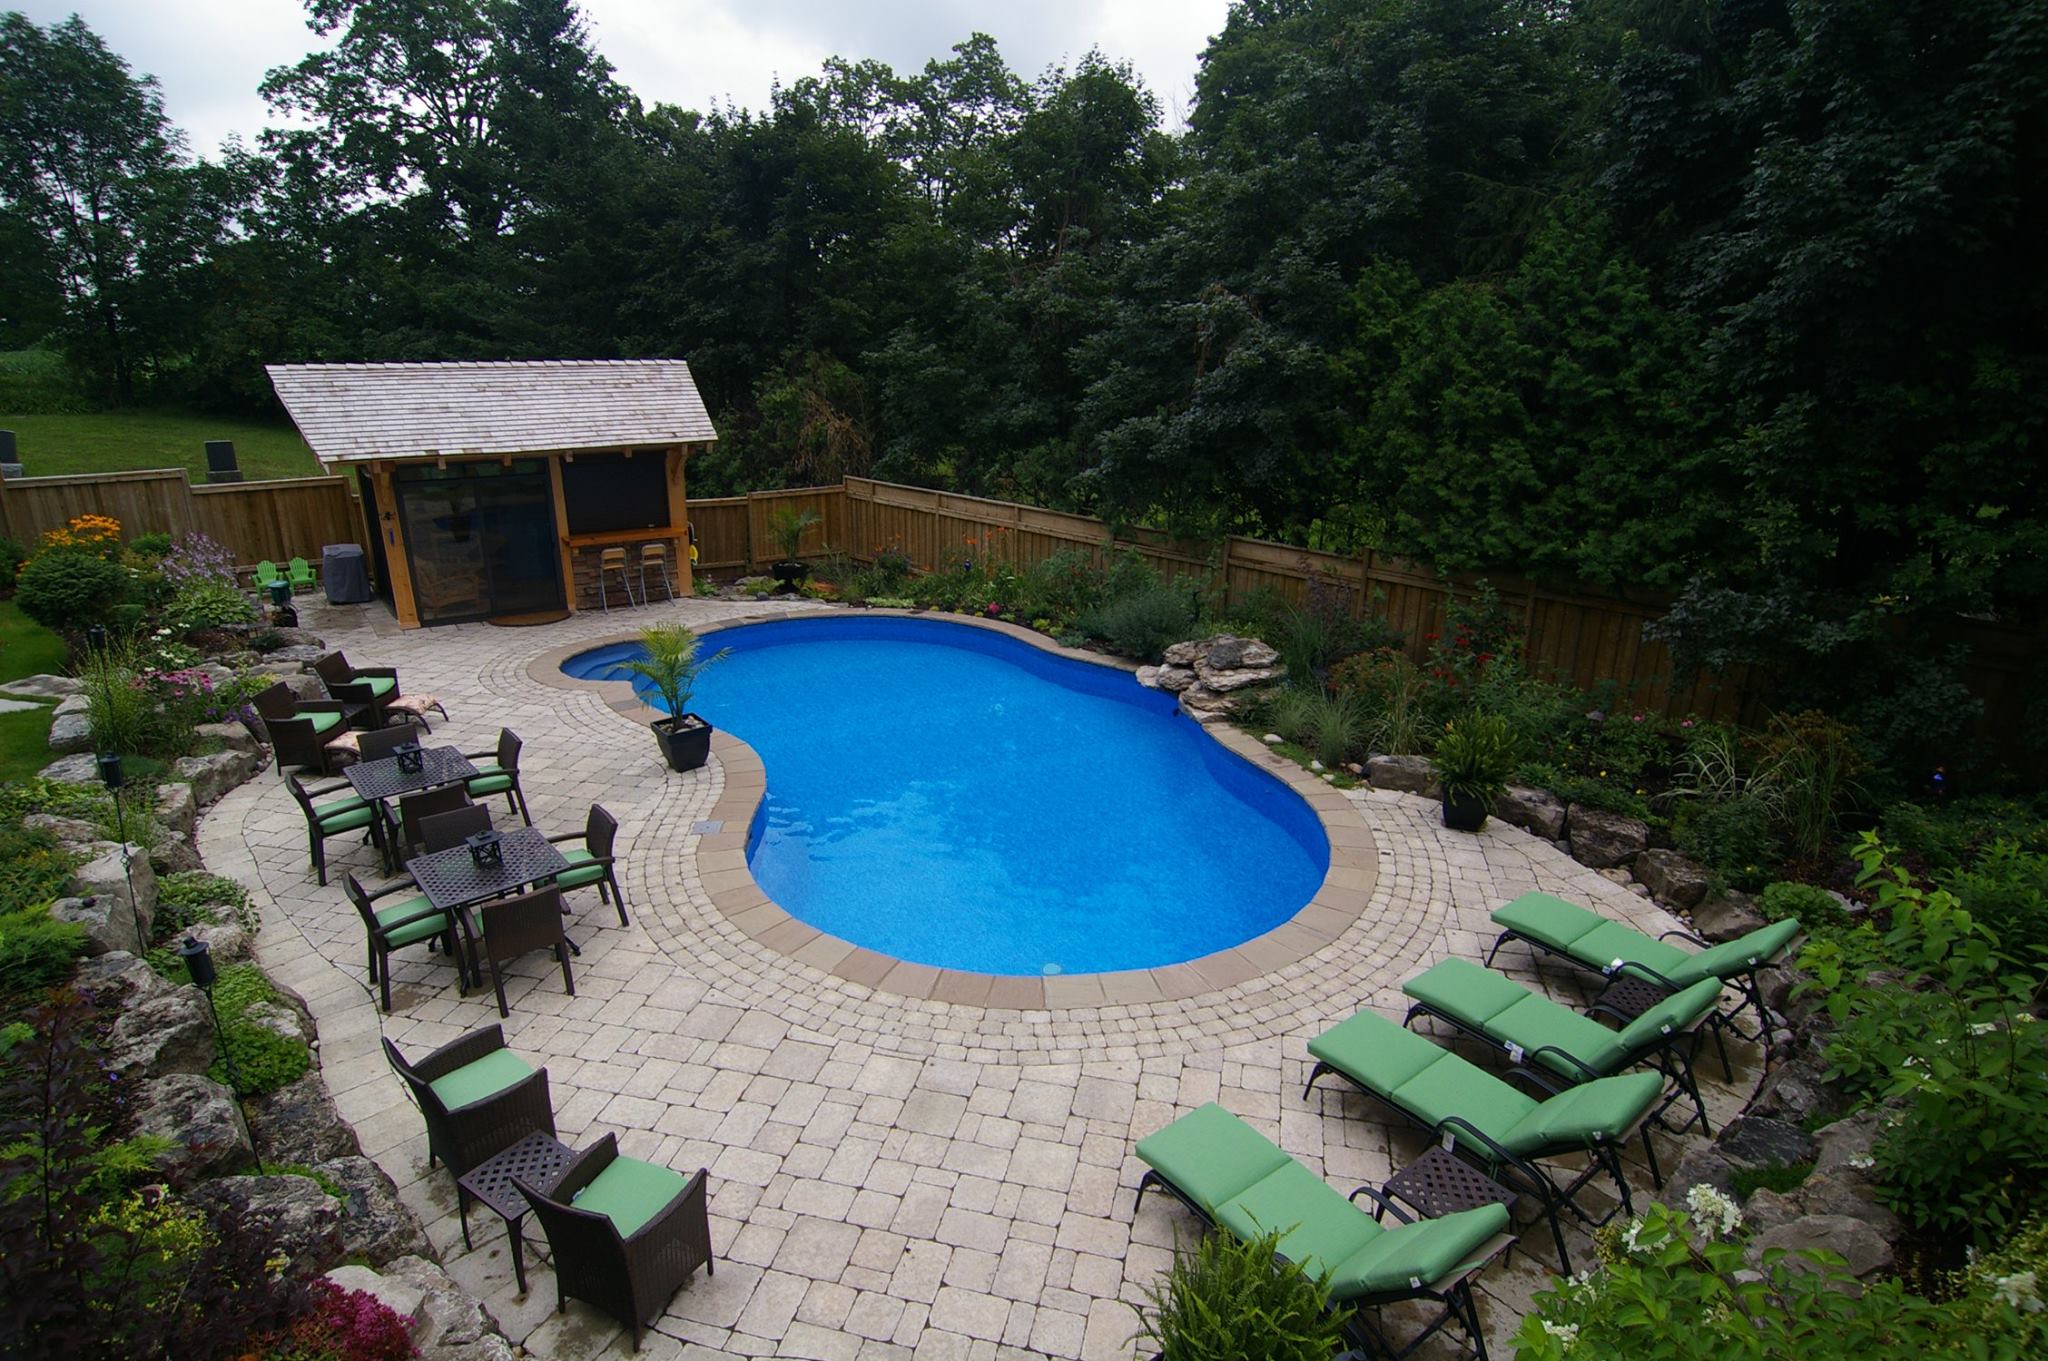 How To Find The Nicest Small Inground Swimming Pool Design